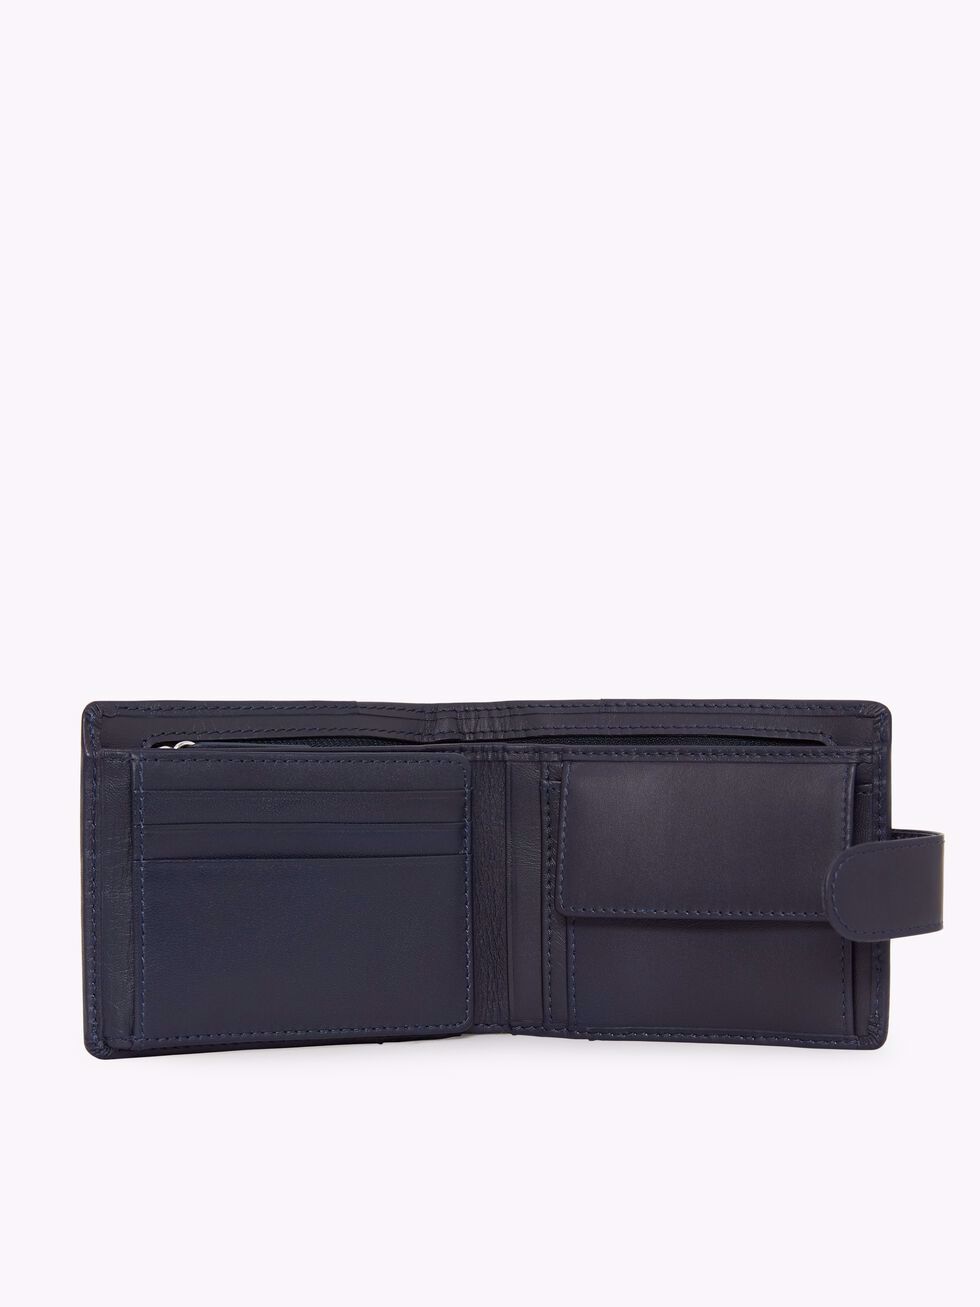 mens wallet with zip coin compartment